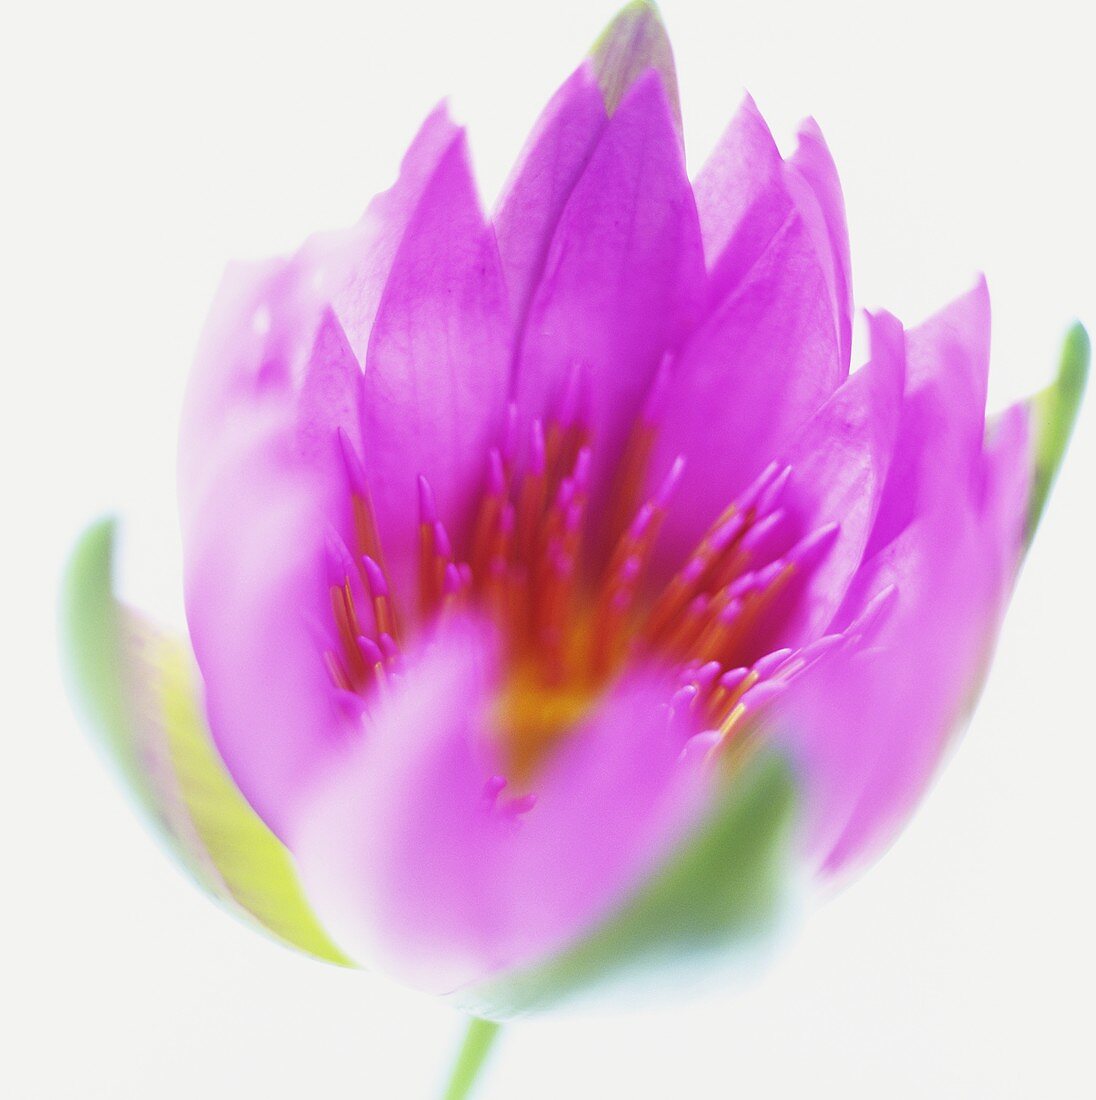 A water lily (close-up)